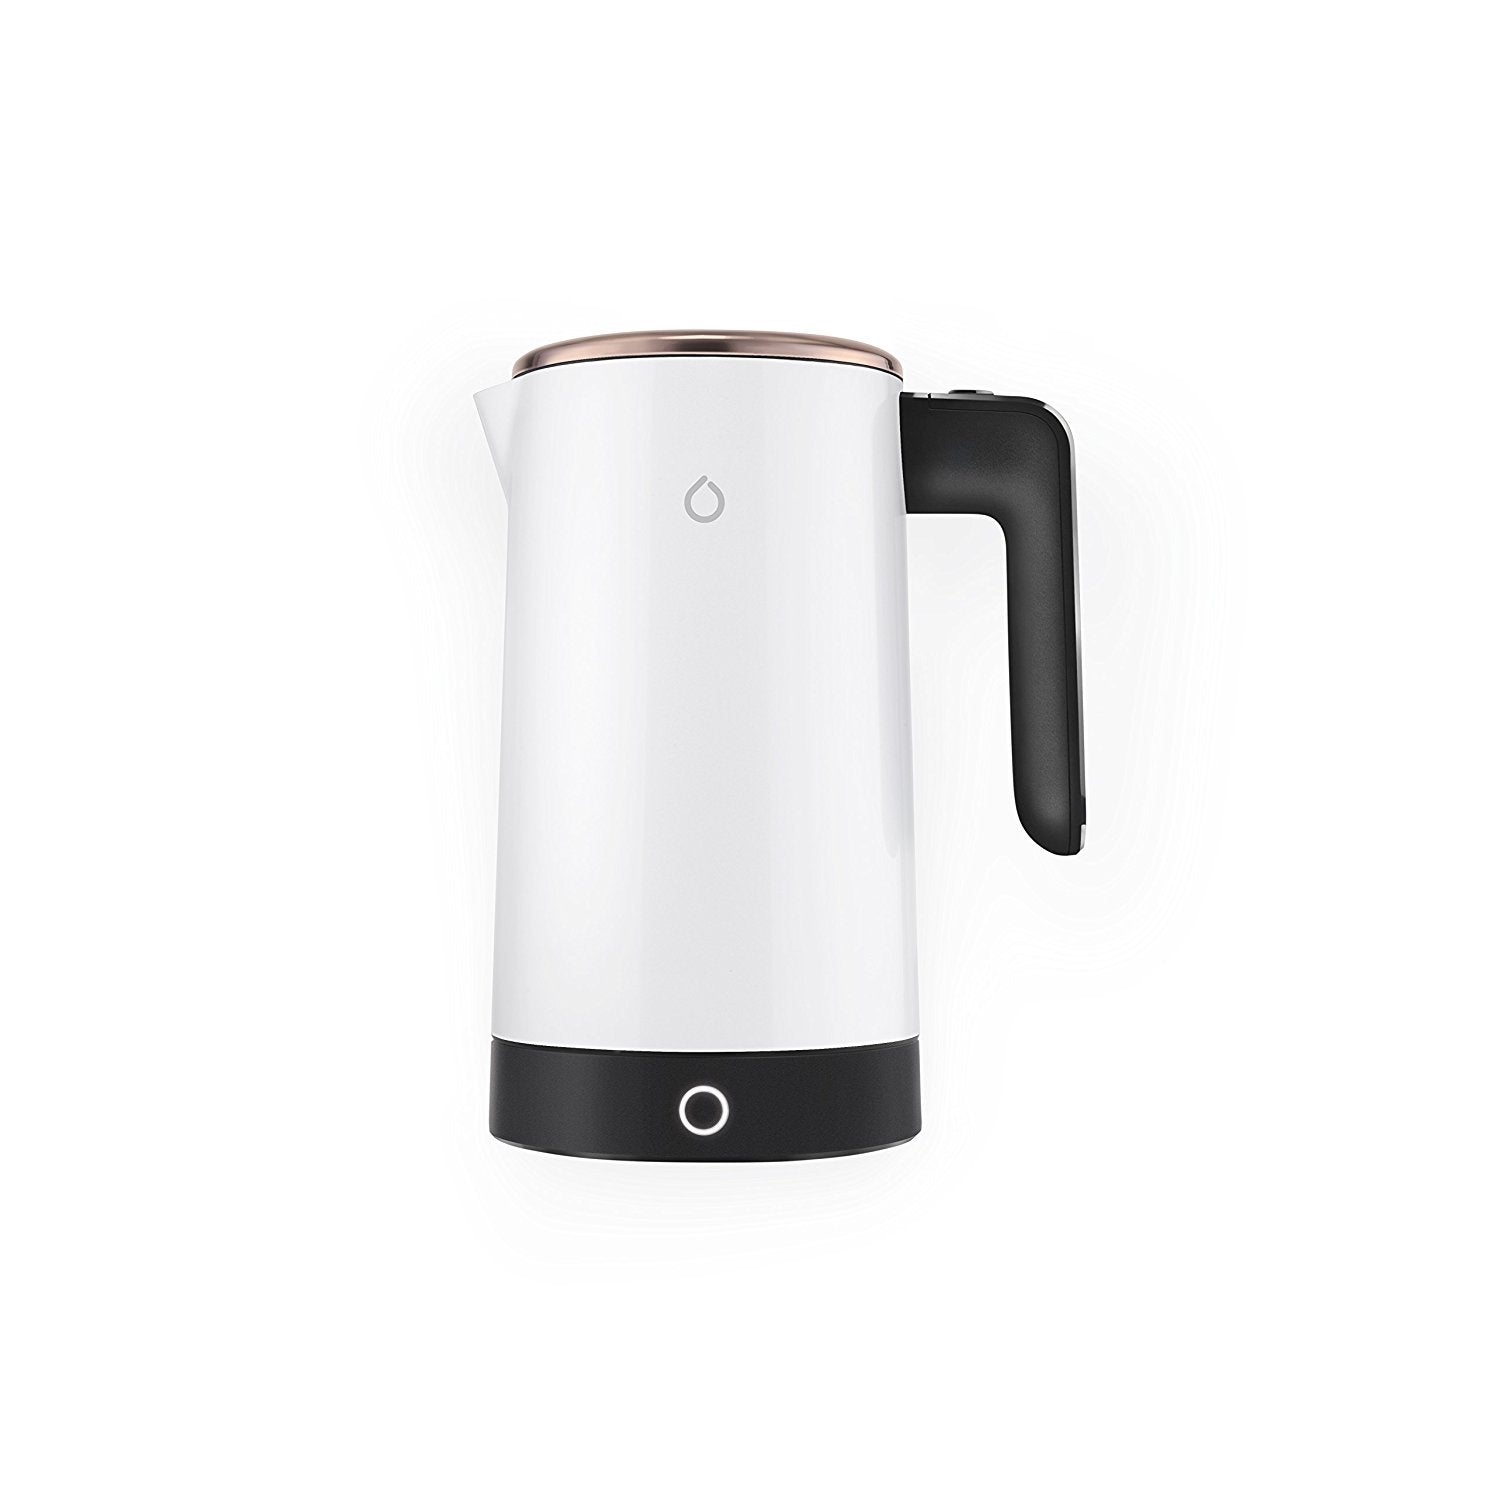 Smarter iKettle 3rd Gen White and Gold (b stock)